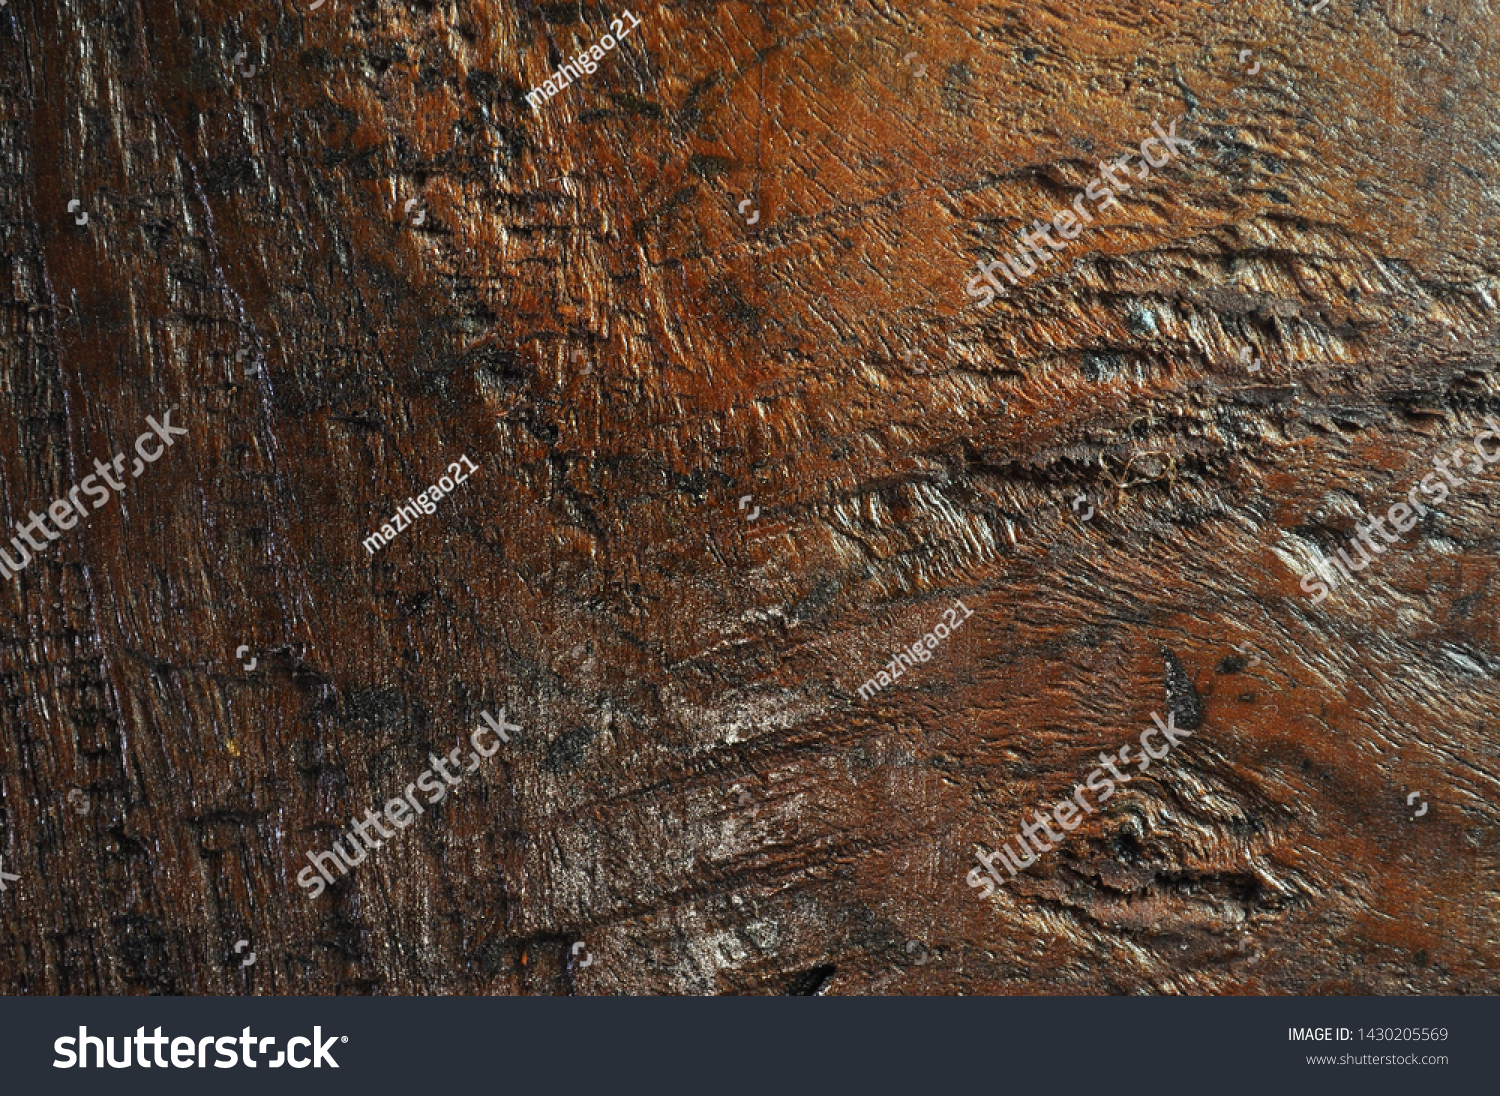 surface of hardwood chip by man background or texture #1430205569